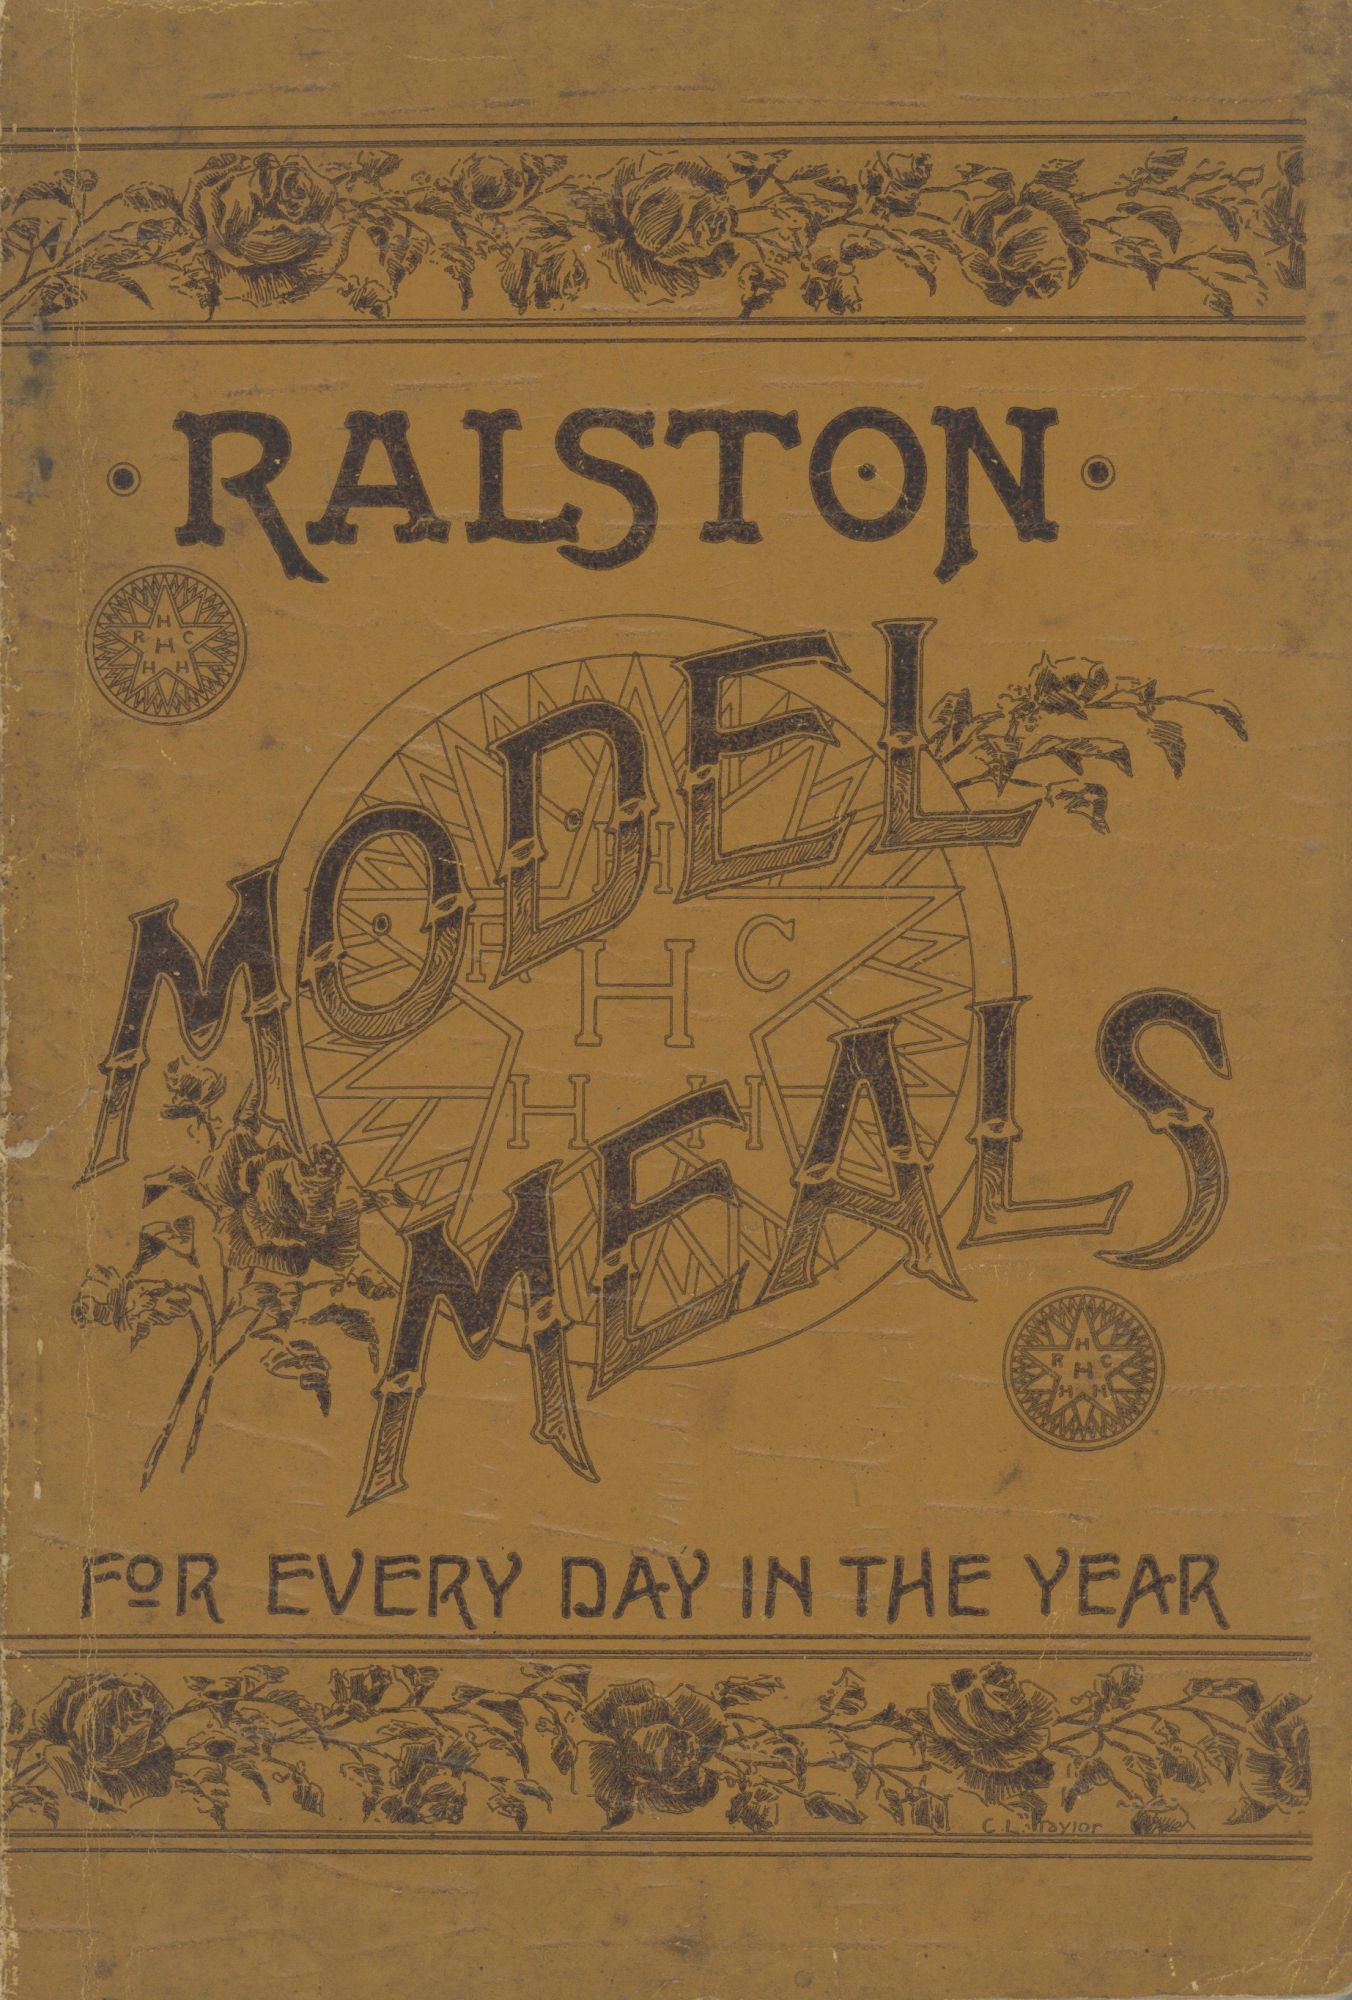 Item #5909 Model Meals for Every Day in the Year and How To Prepare Them: What to Eat, to Strengthen the Brain, to Make Muscle, to Establish Health. Being the third Edition of Ralston Meals, re-arranged and enlarged, with more than three times as much matter as appeared in the second edition. [Compiled by the Ralston Health Club.]. Ralston Company, D. C. Washington, Ralston Health Club, Webster Edgerly.